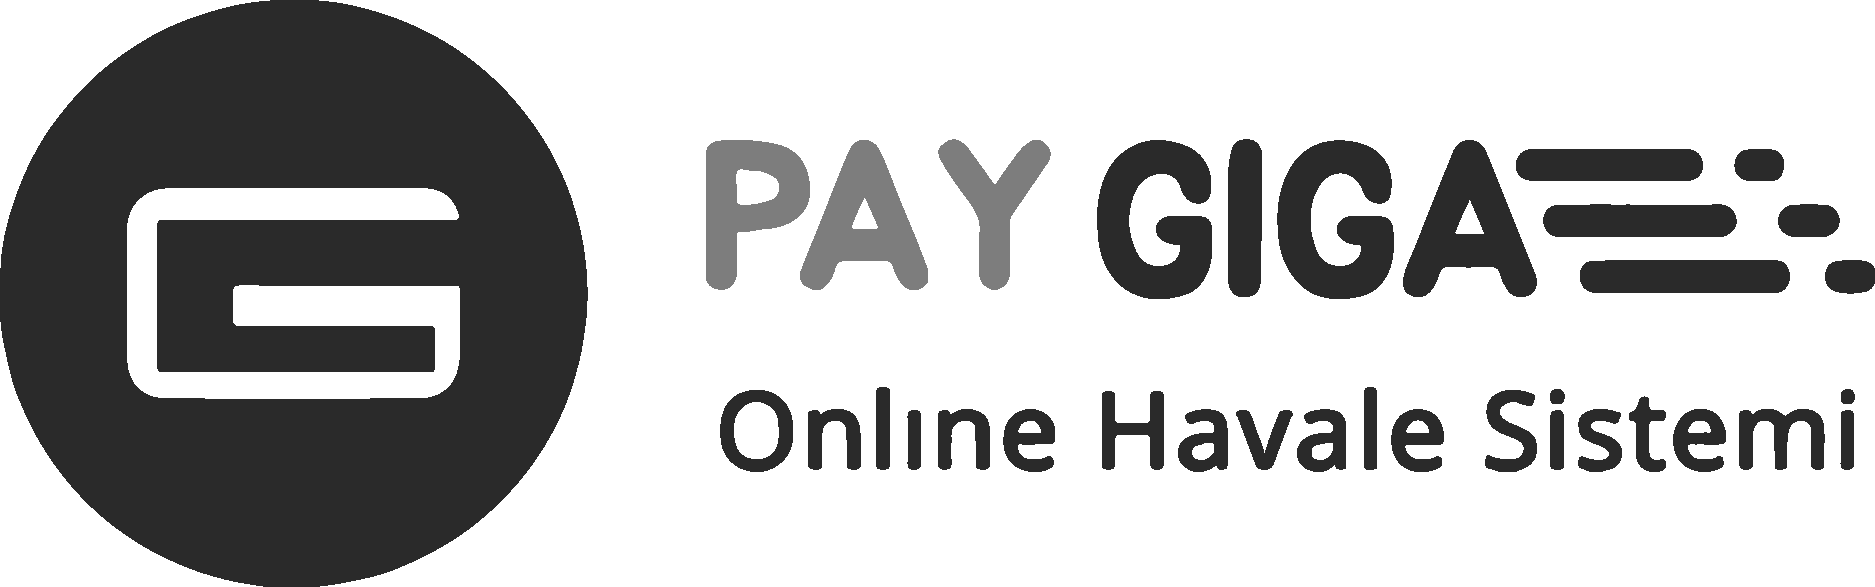 Google Pay Logo PNG Vector - FREE Vector Design - Cdr, Ai, EPS, PNG, SVG